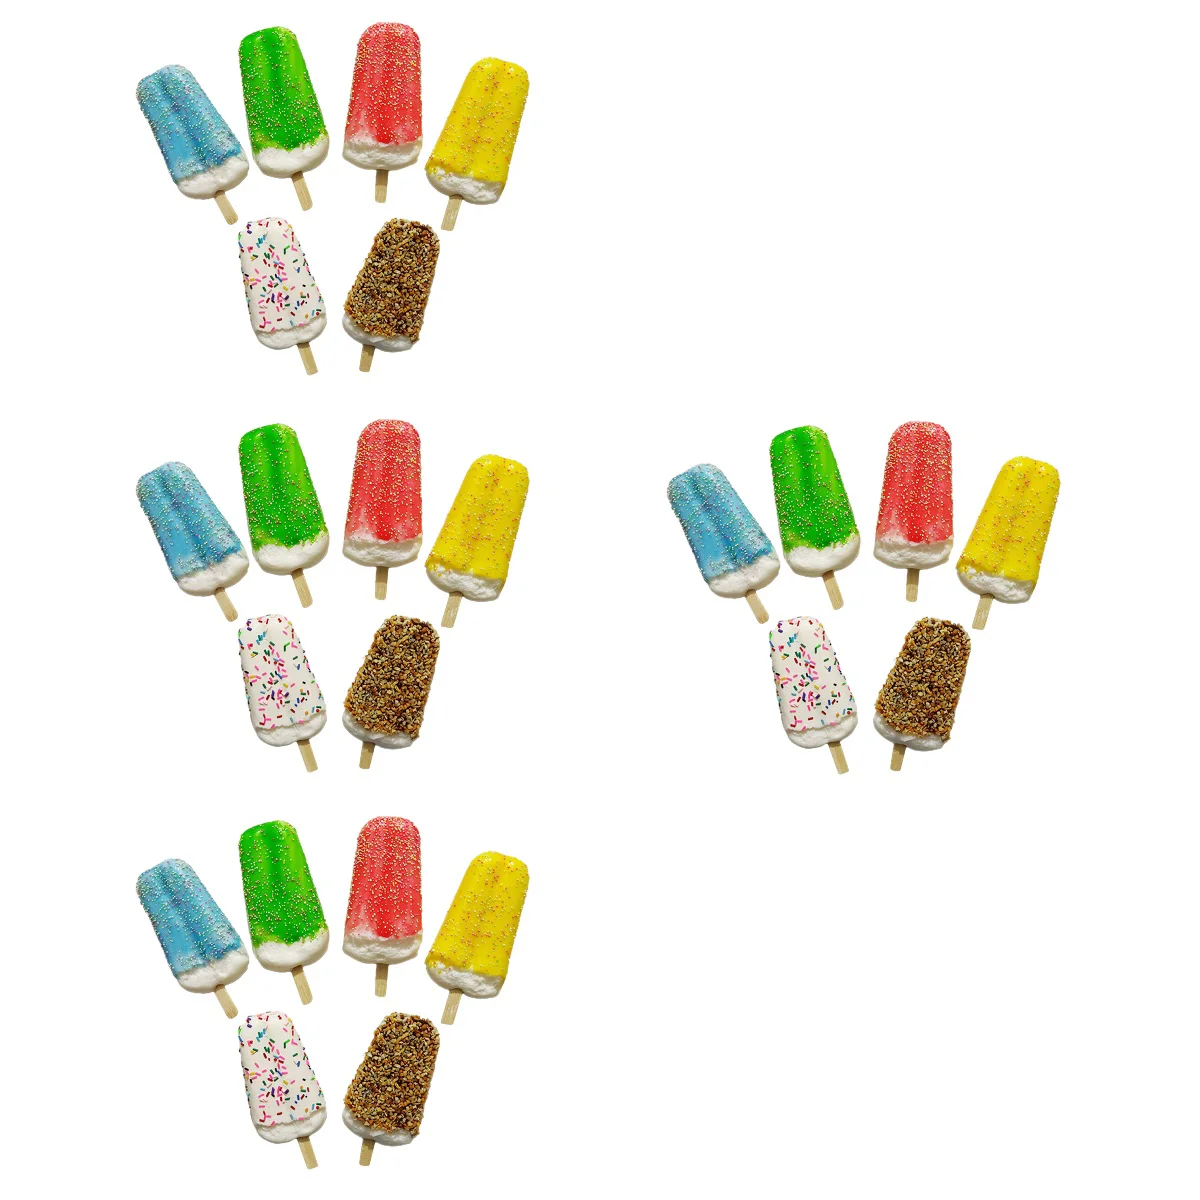 

24 pcs Simulation Ice-lolly Realistic Stick Ice Cream Models Ice Candy Models